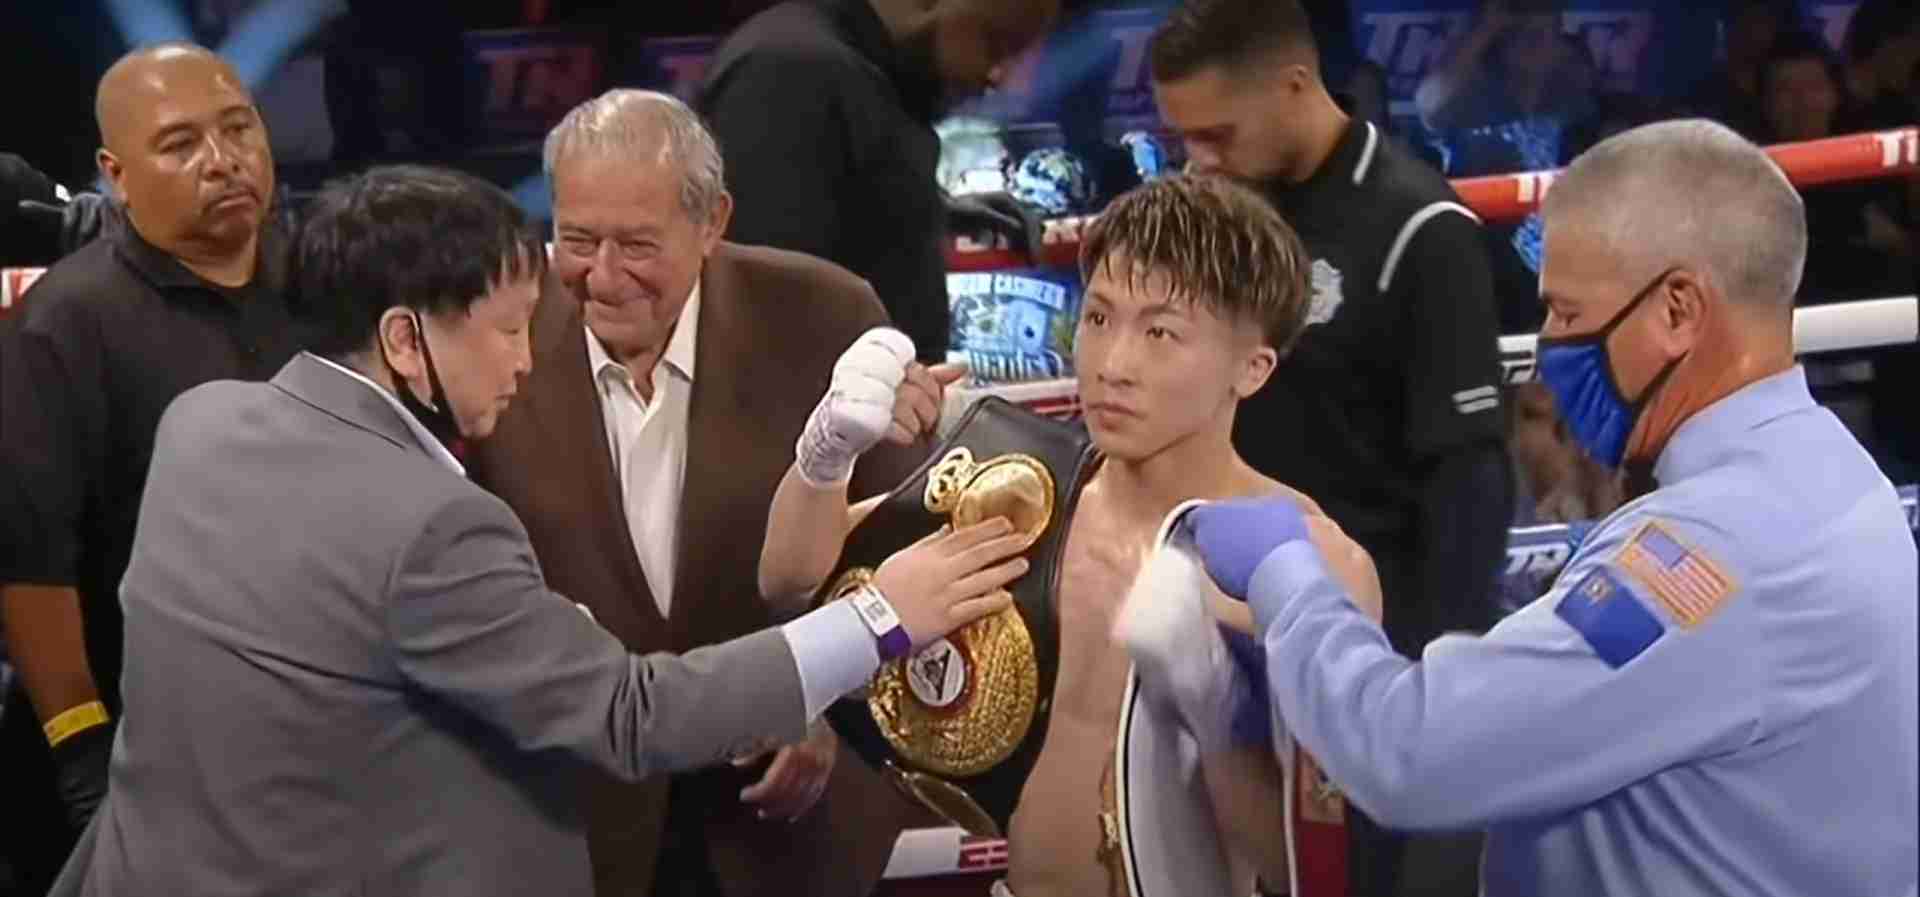 Magic Naoya Inoue vs Nonito Donaire Match Confirmed For Fight Fans